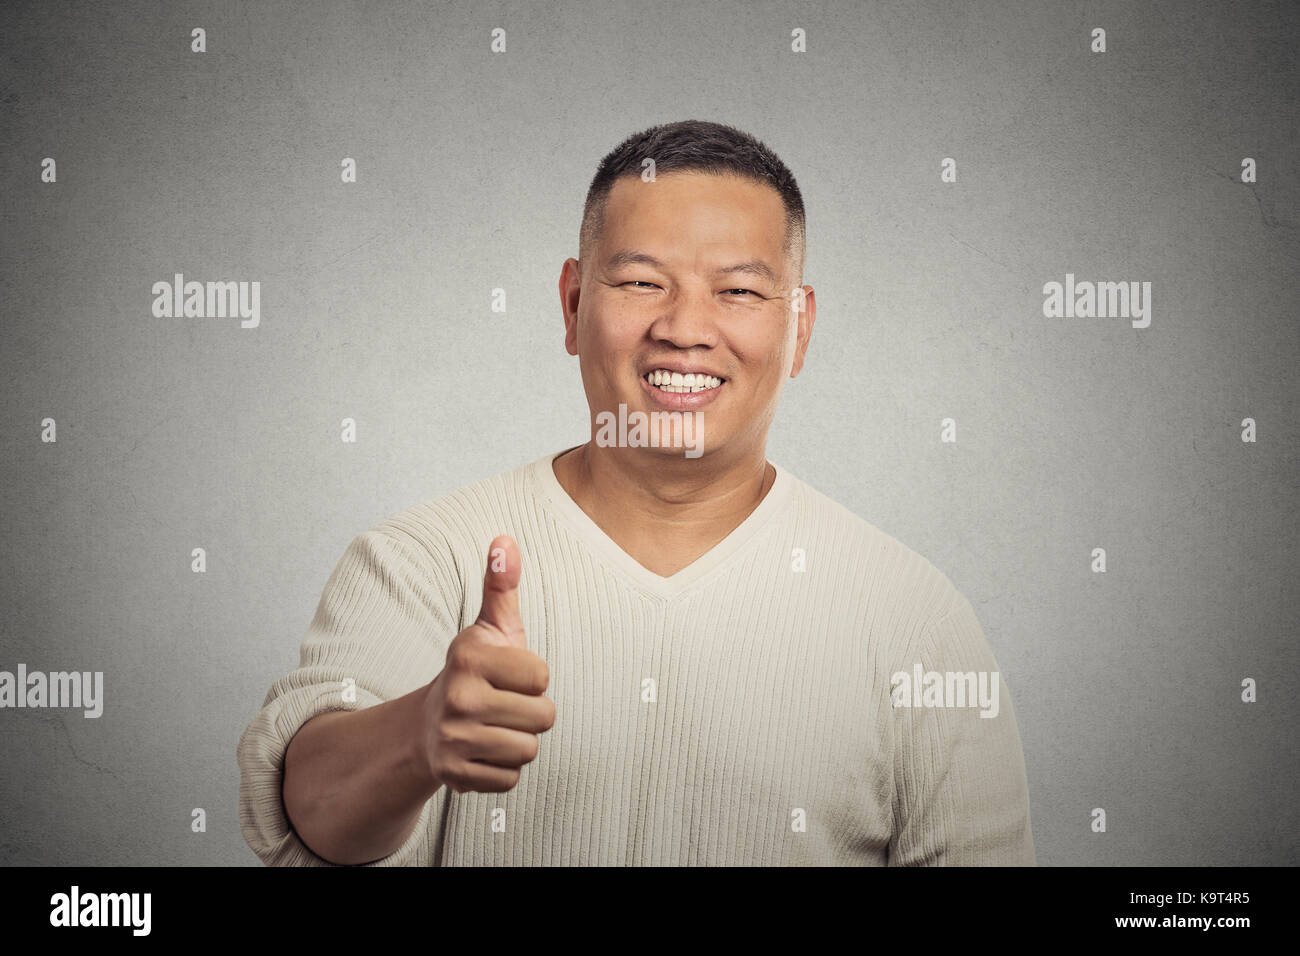 Closeup portrait happy handsome young smiling man employee giving thumbs up sign gesture at camera isolated grey wall background. Positive human emoti Stock Photo